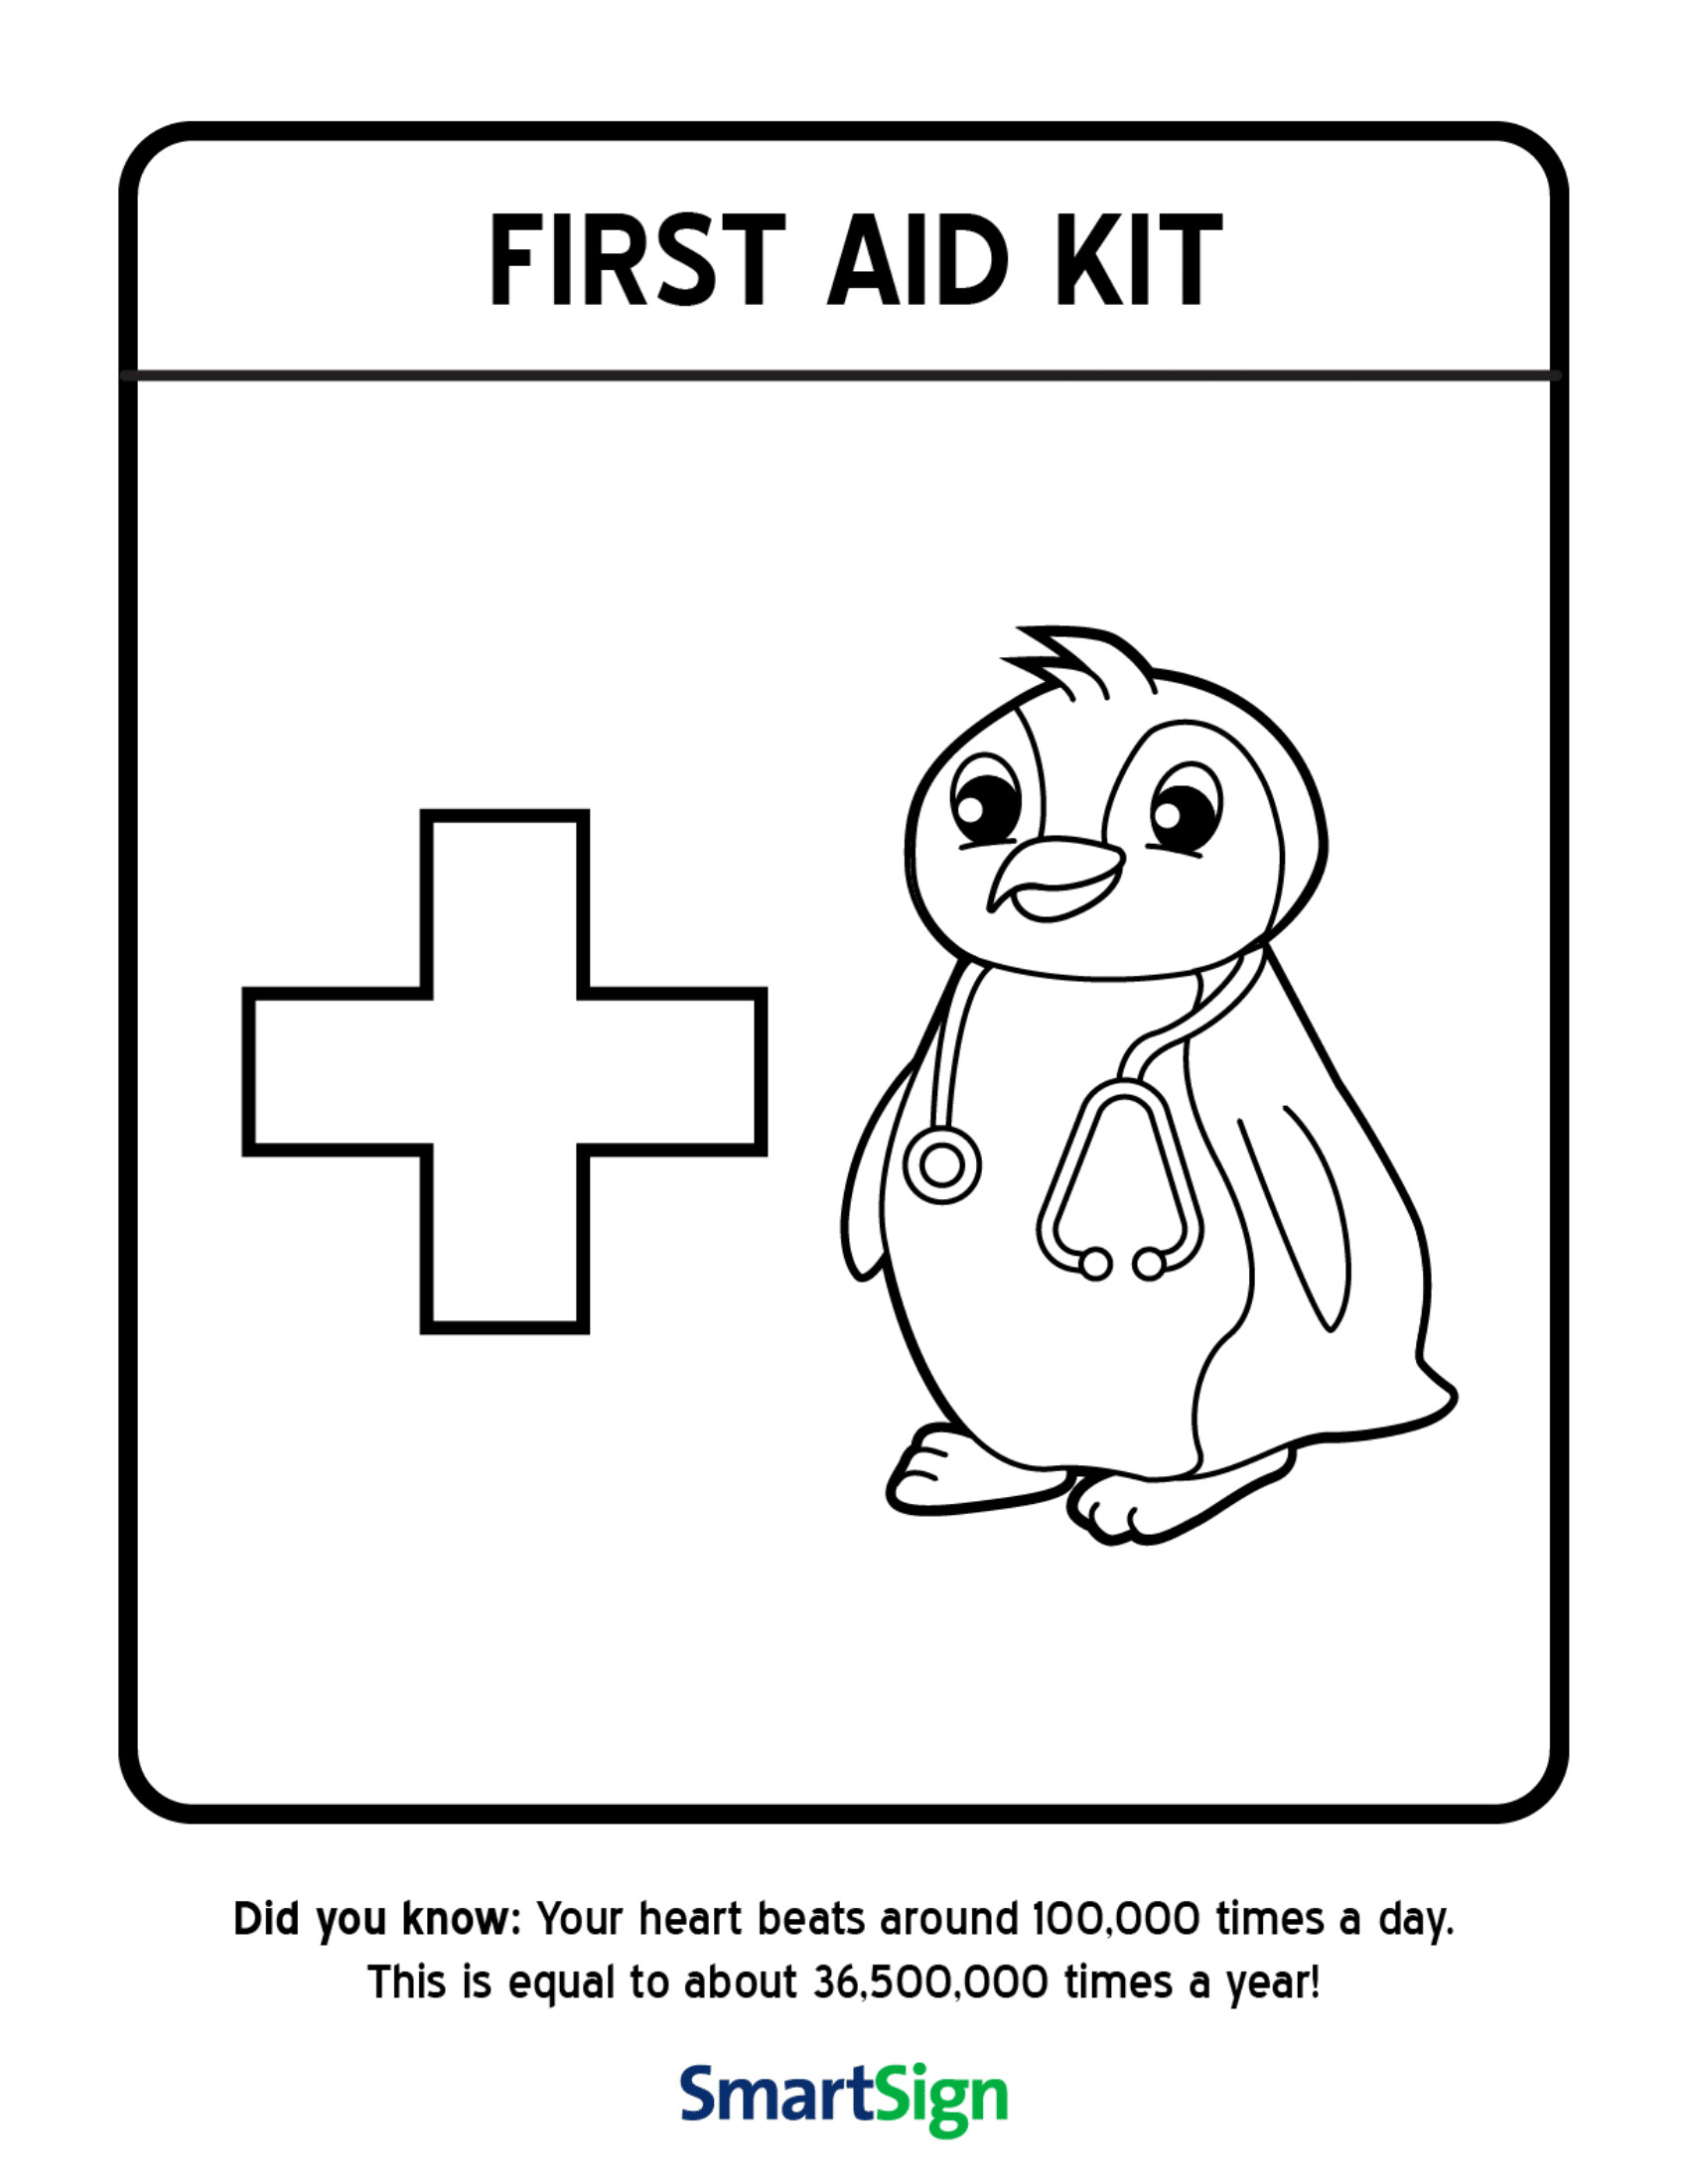 Coloring Kits For Kids
 Safety Coloring Printable for Kids First Aid Kit